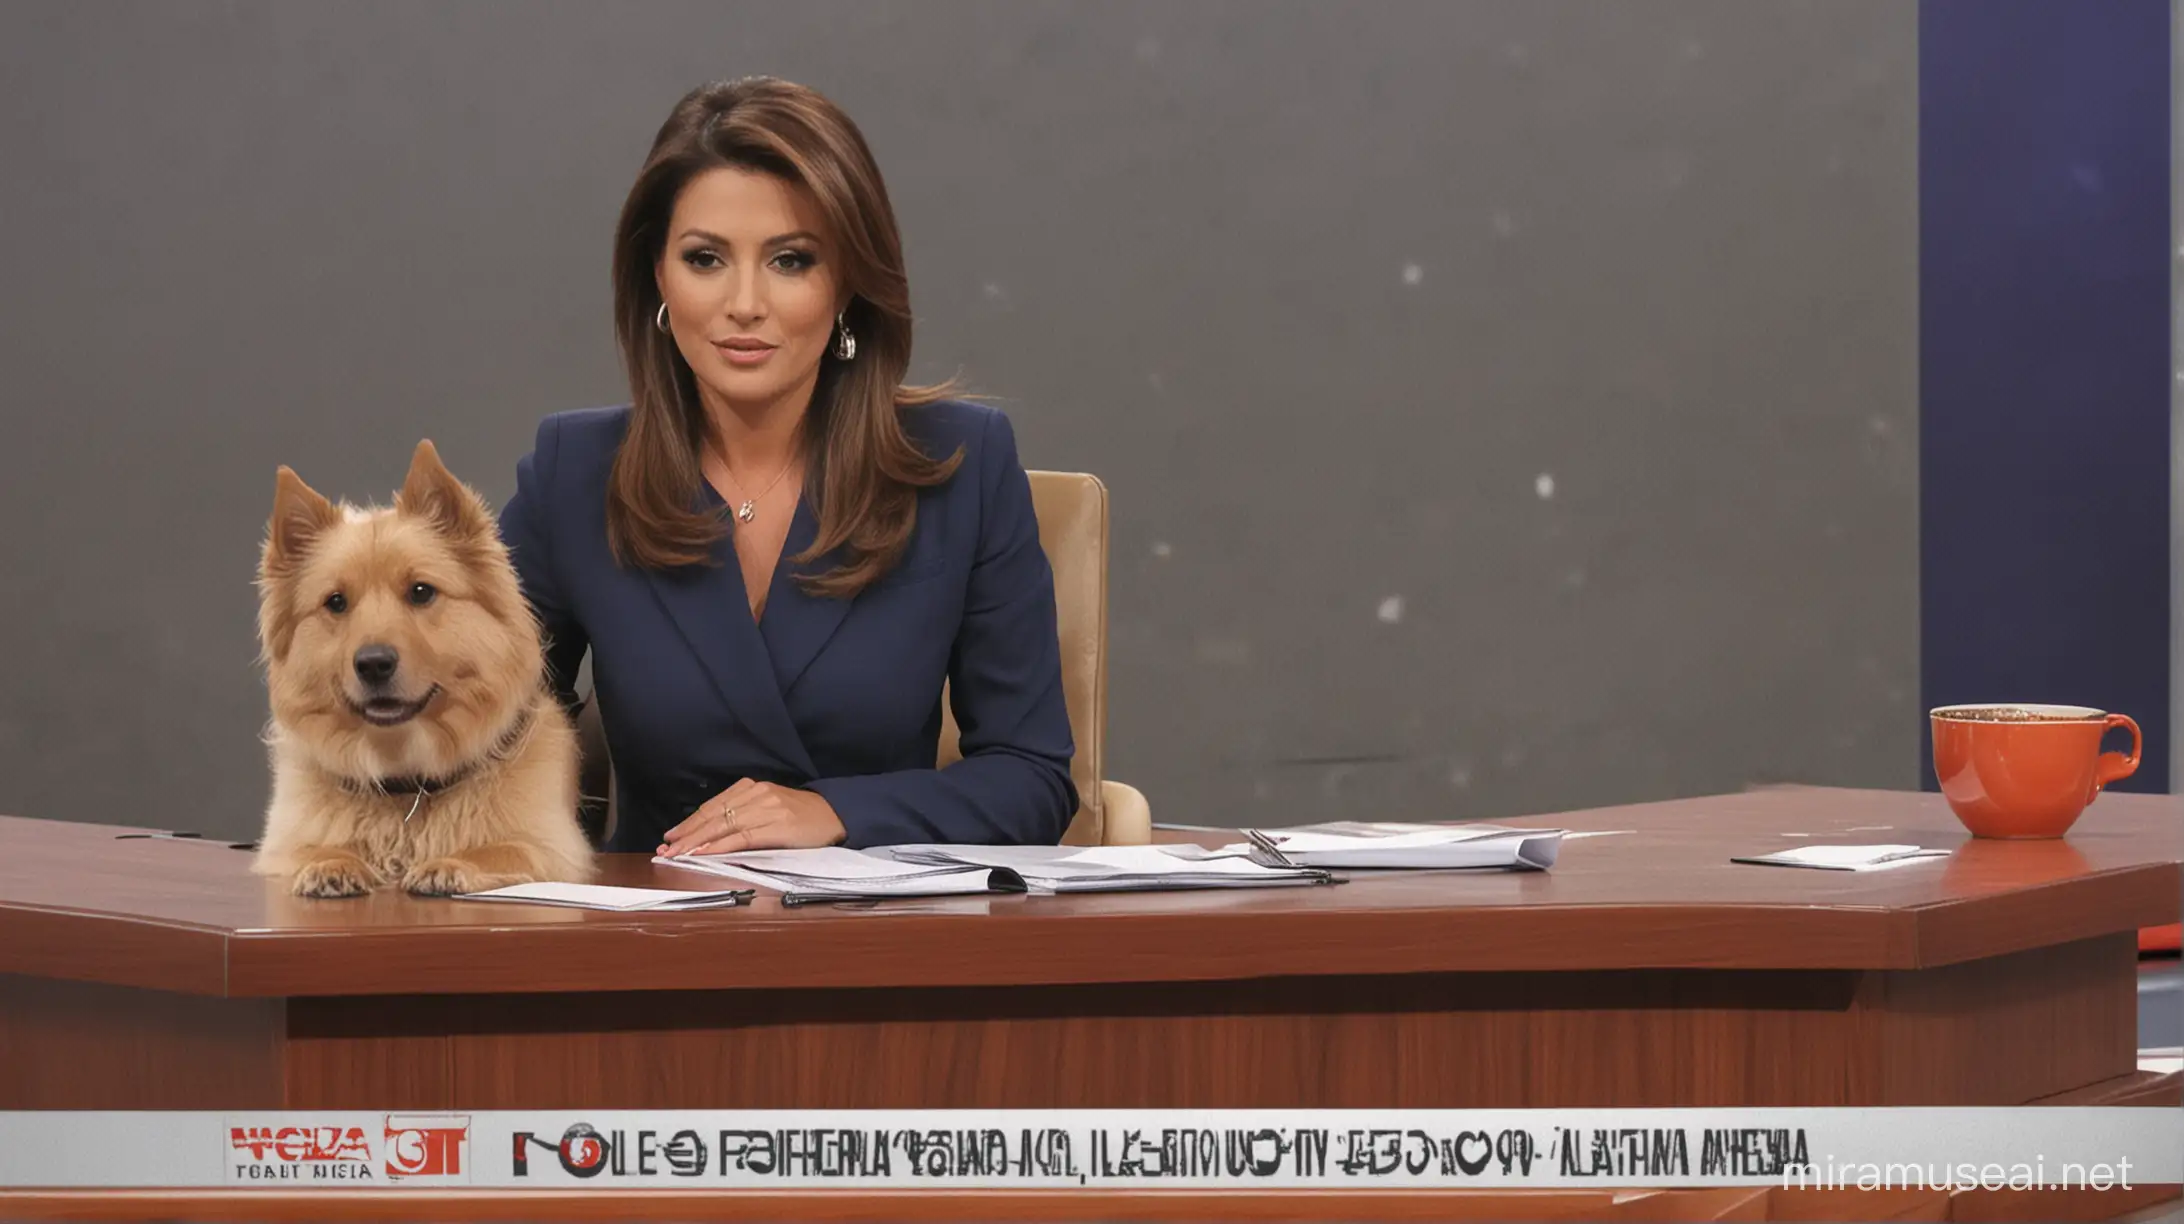 Unexpected Dog Interruption During Live TV Broadcast in Bolivia